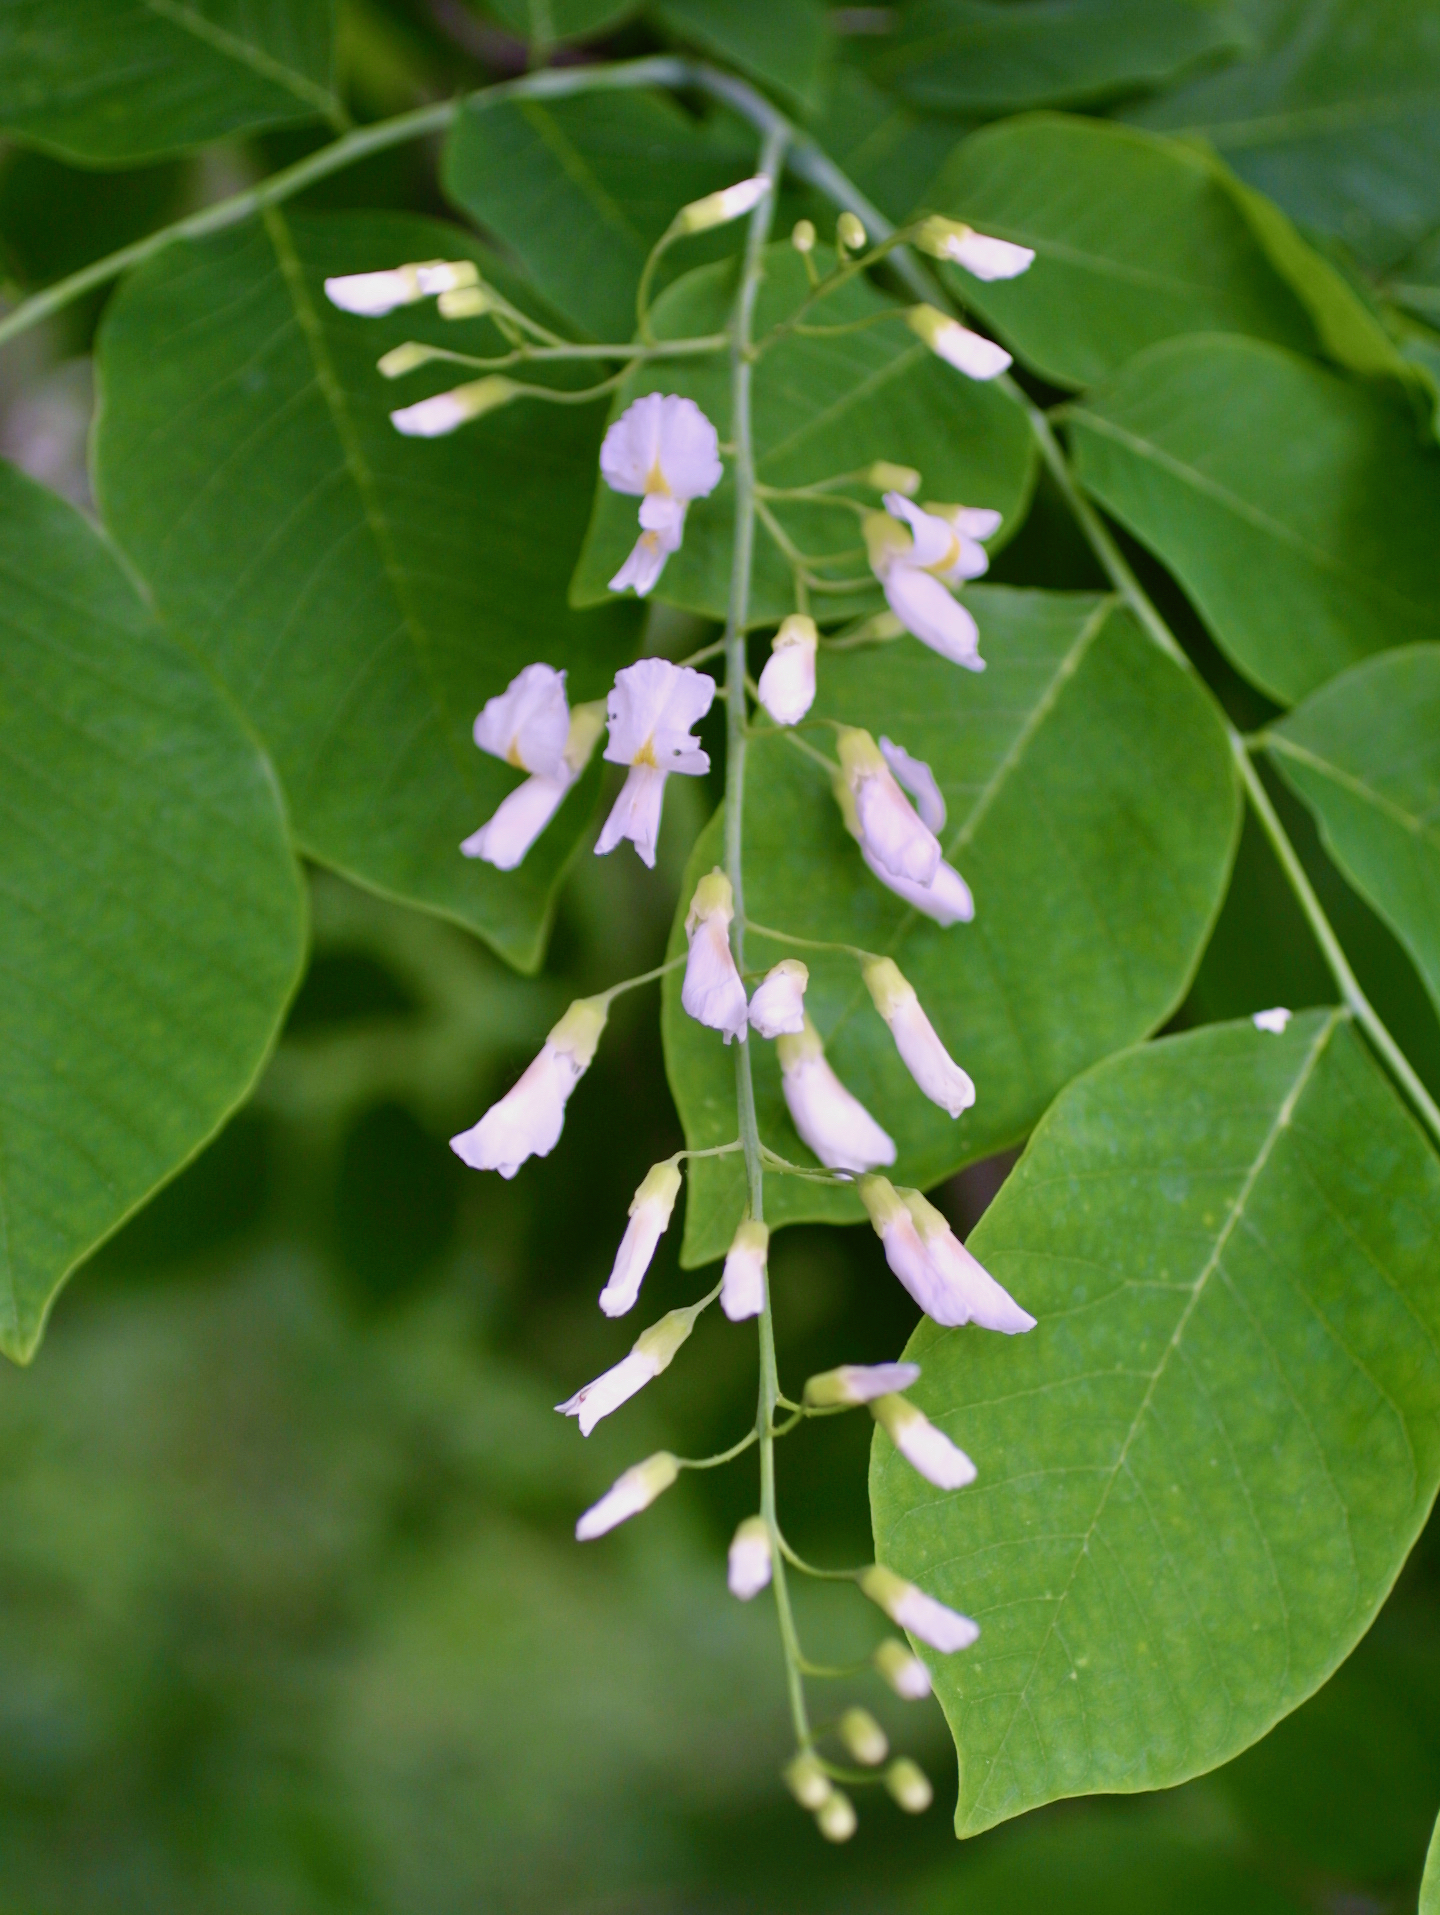 The Scientific Name is Cladrastis kentukea [= Cladrastis lutea]. You will likely hear them called Yellow-wood, Yellowwood, American Yellowwood. This picture shows the Alternate compound leaves and white flowers with yellow throats of Cladrastis kentukea [= Cladrastis lutea]